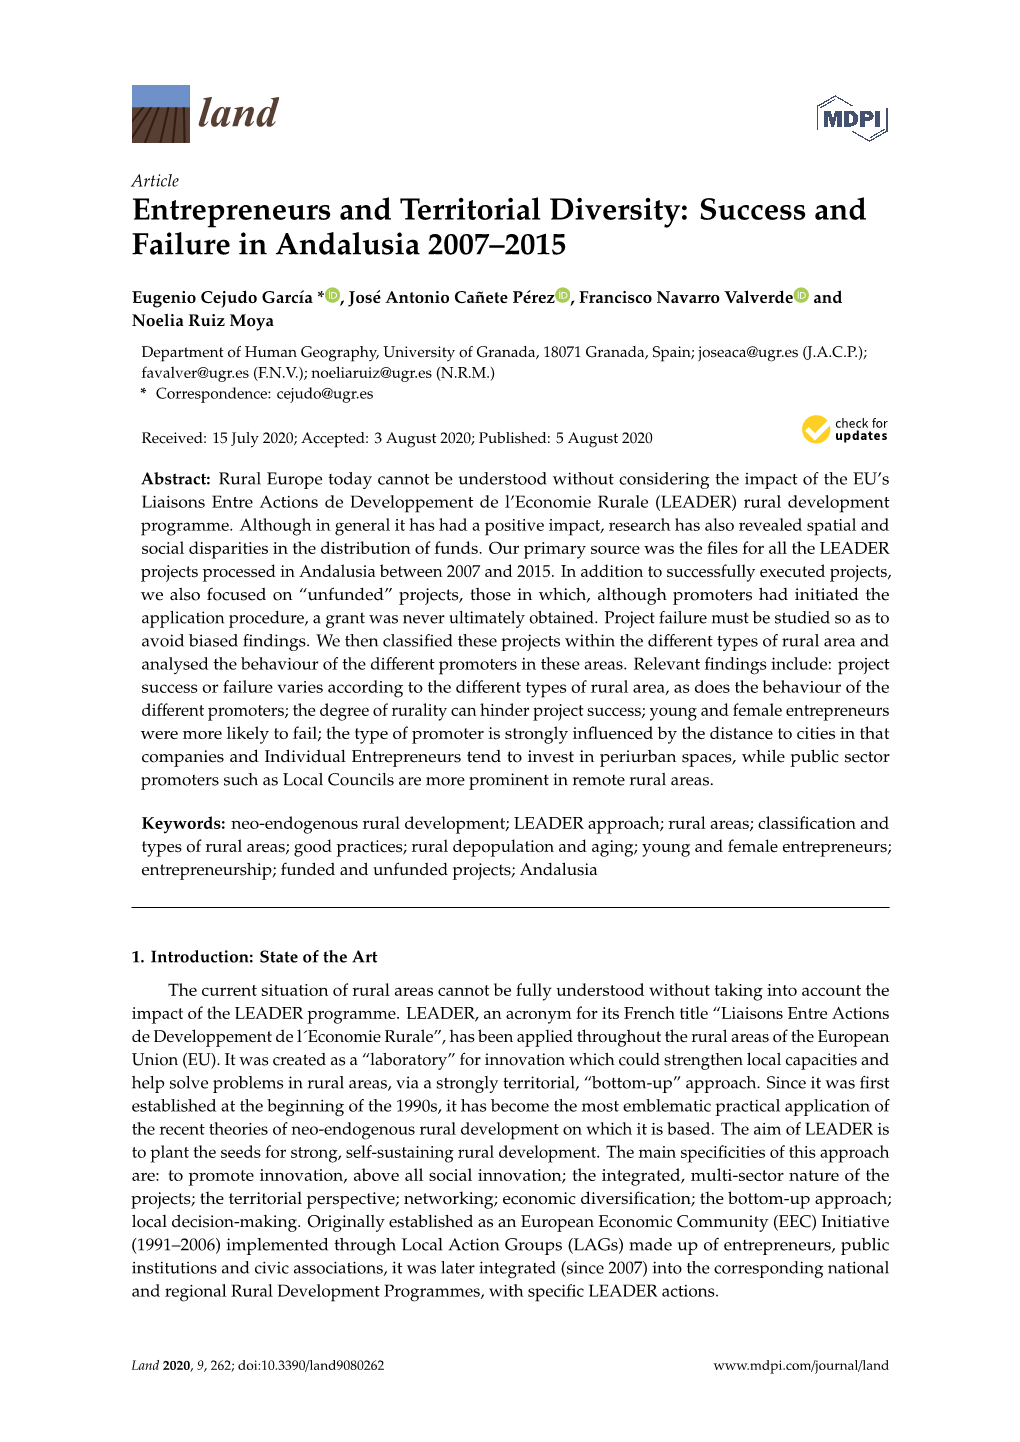 Entrepreneurs and Territorial Diversity: Success and Failure in Andalusia 2007–2015